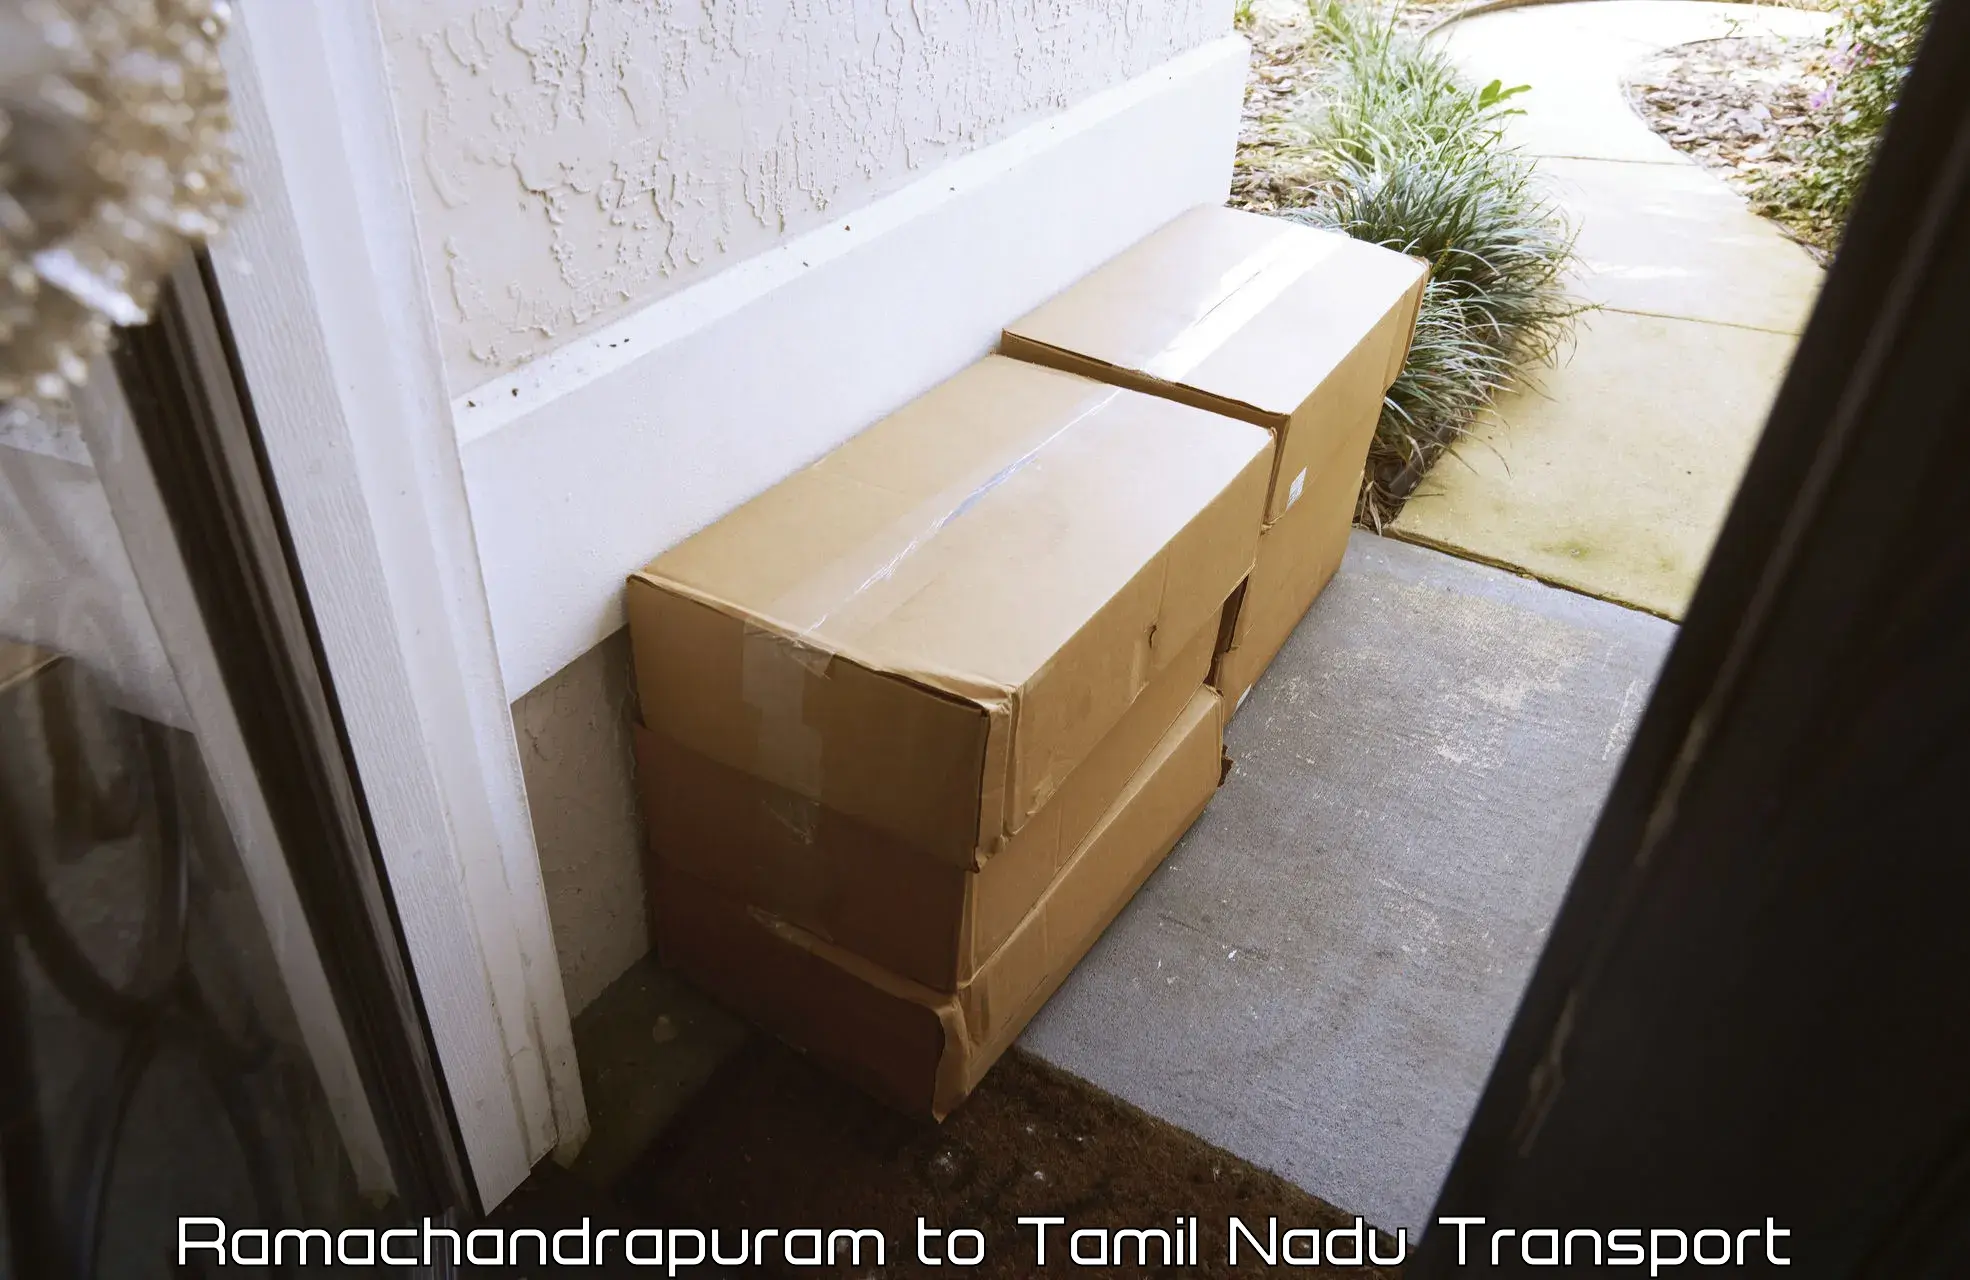 Domestic goods transportation services Ramachandrapuram to Shanmugha Arts Science Technology and Research Academy Thanjavur